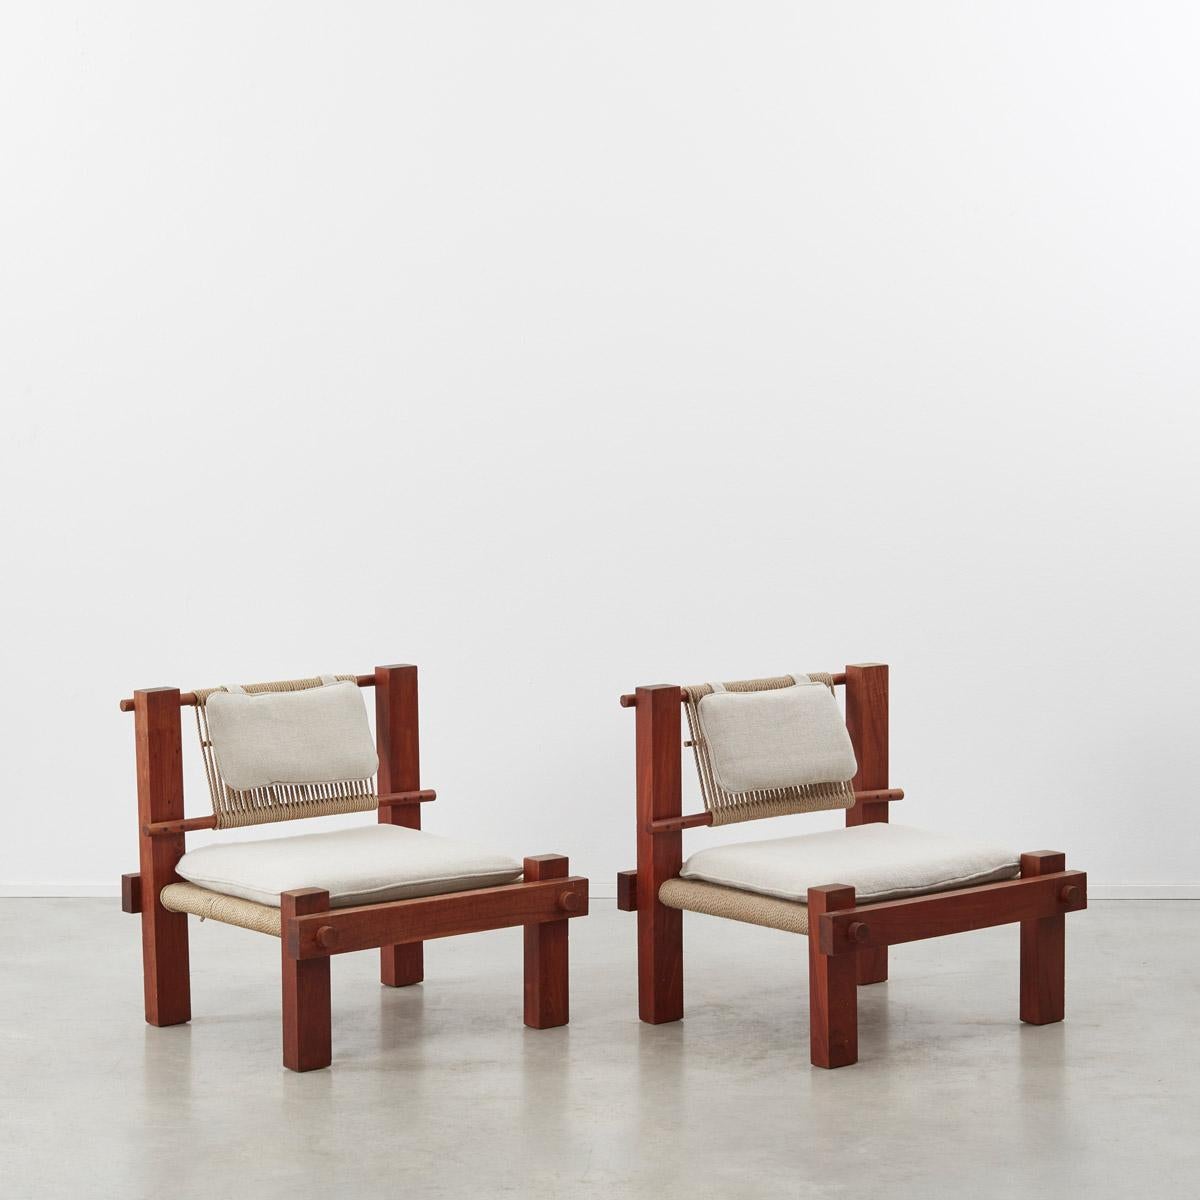 A pair of midcentury constructivist-style lounge chairs simply made from boxy hardwood frames and rope seats. While the thick bound cord is reminiscent of the 1952 rope chair by Jørgen Høj and Poul Kjærholm, Denmark, the boxy profile and stylized